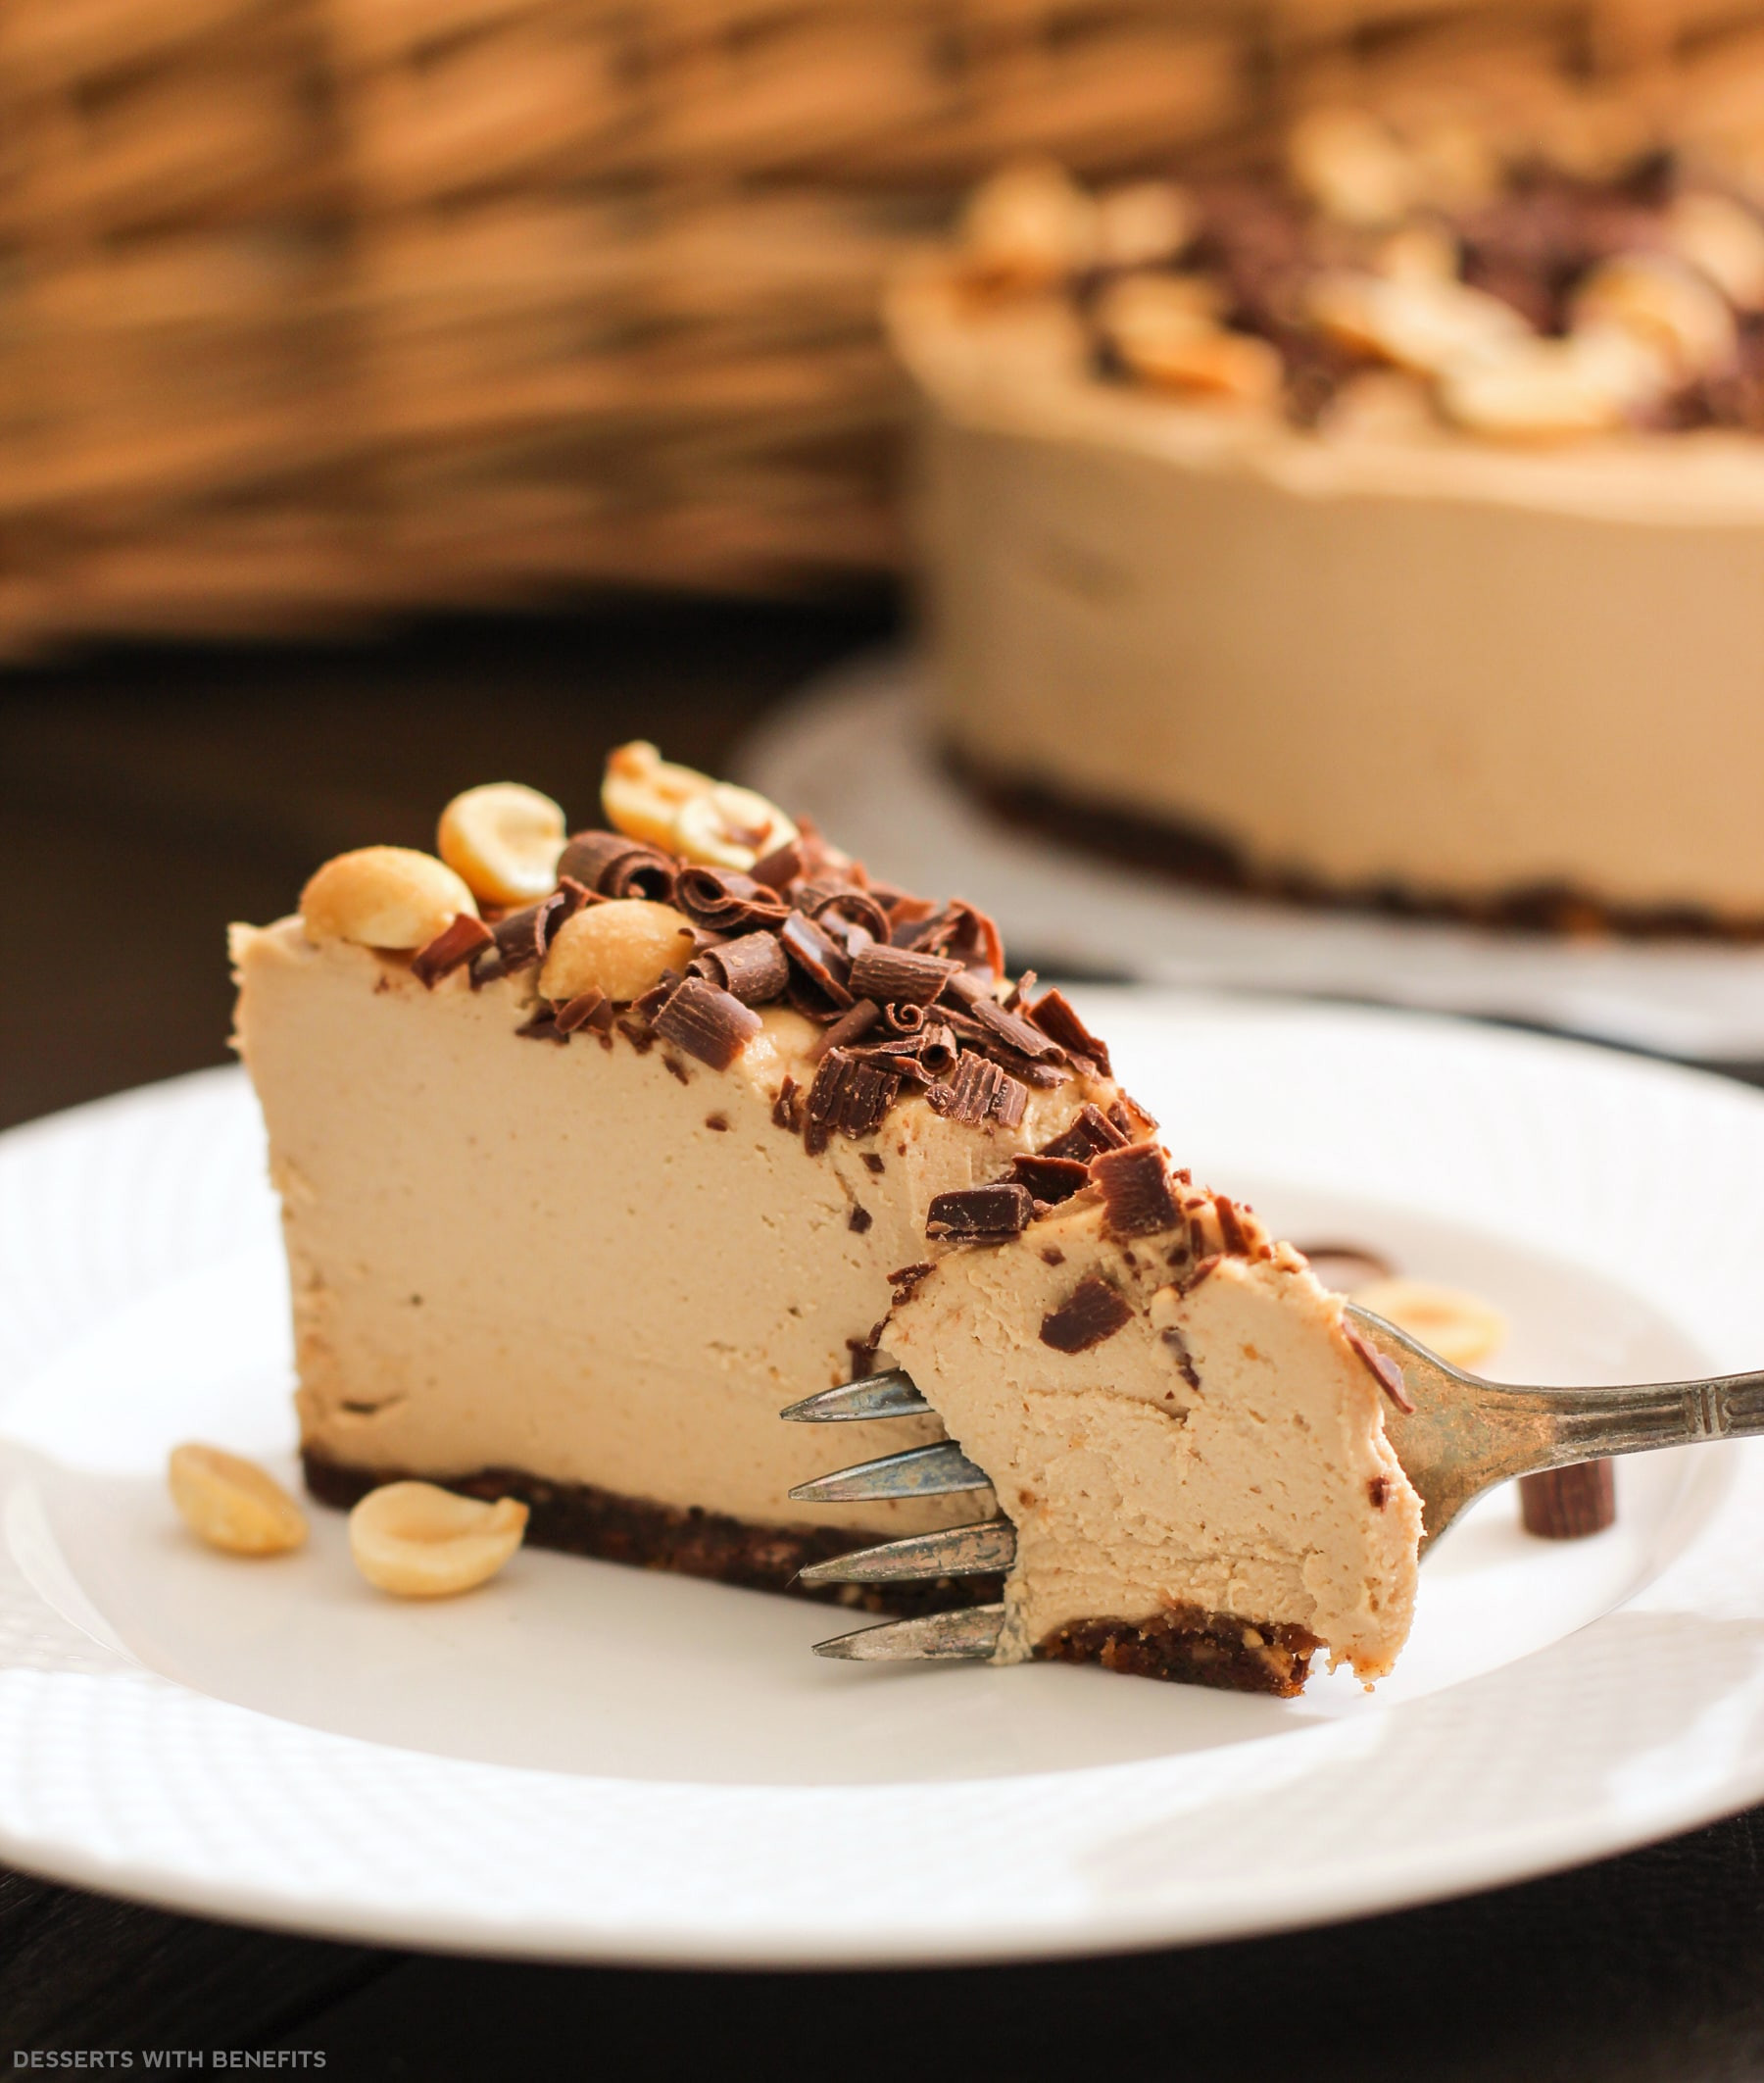 Healthy Baked Desserts
 Healthy Chocolate Peanut Butter Raw Cheesecake